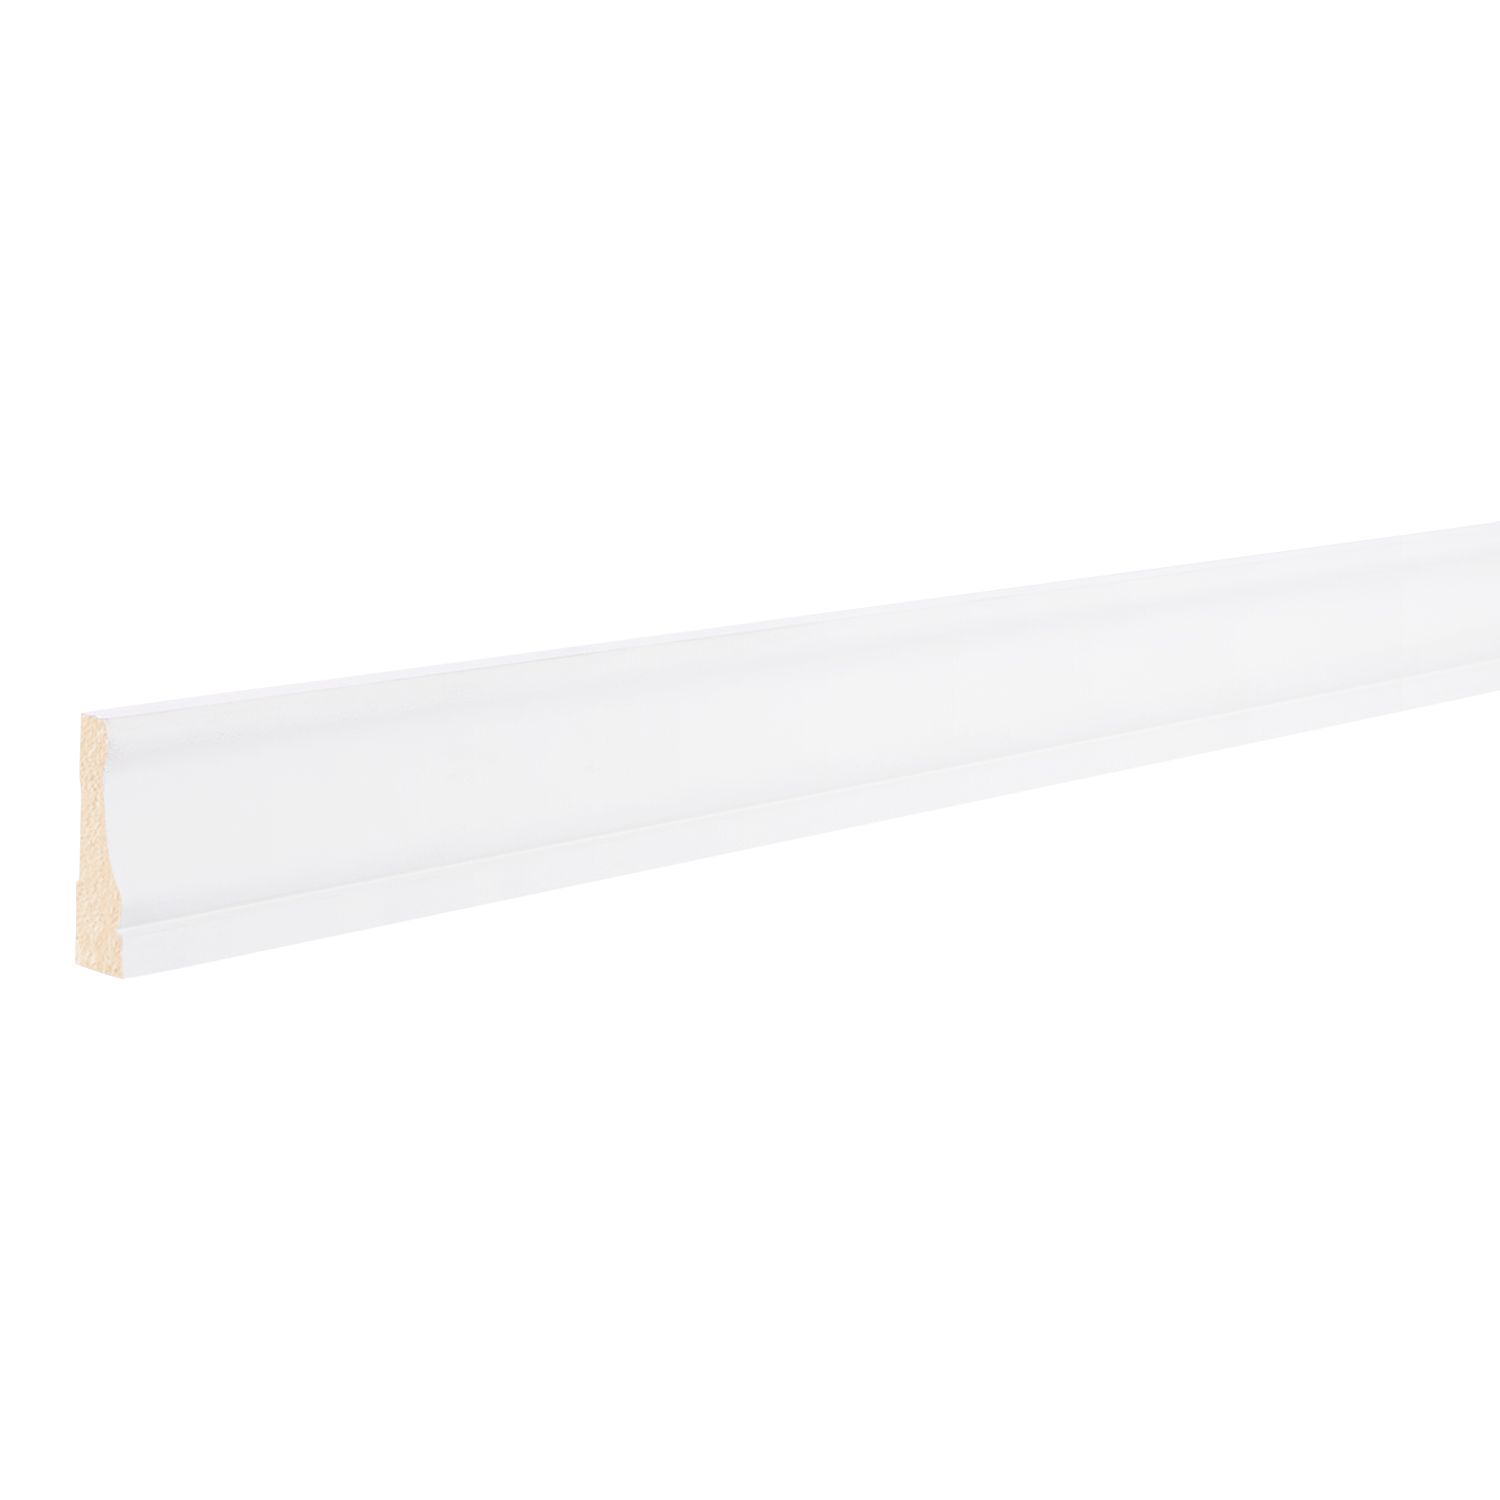 12mm MDF Architrave Lambs Tongue MR Primed 5.4m (price per lineal metre)